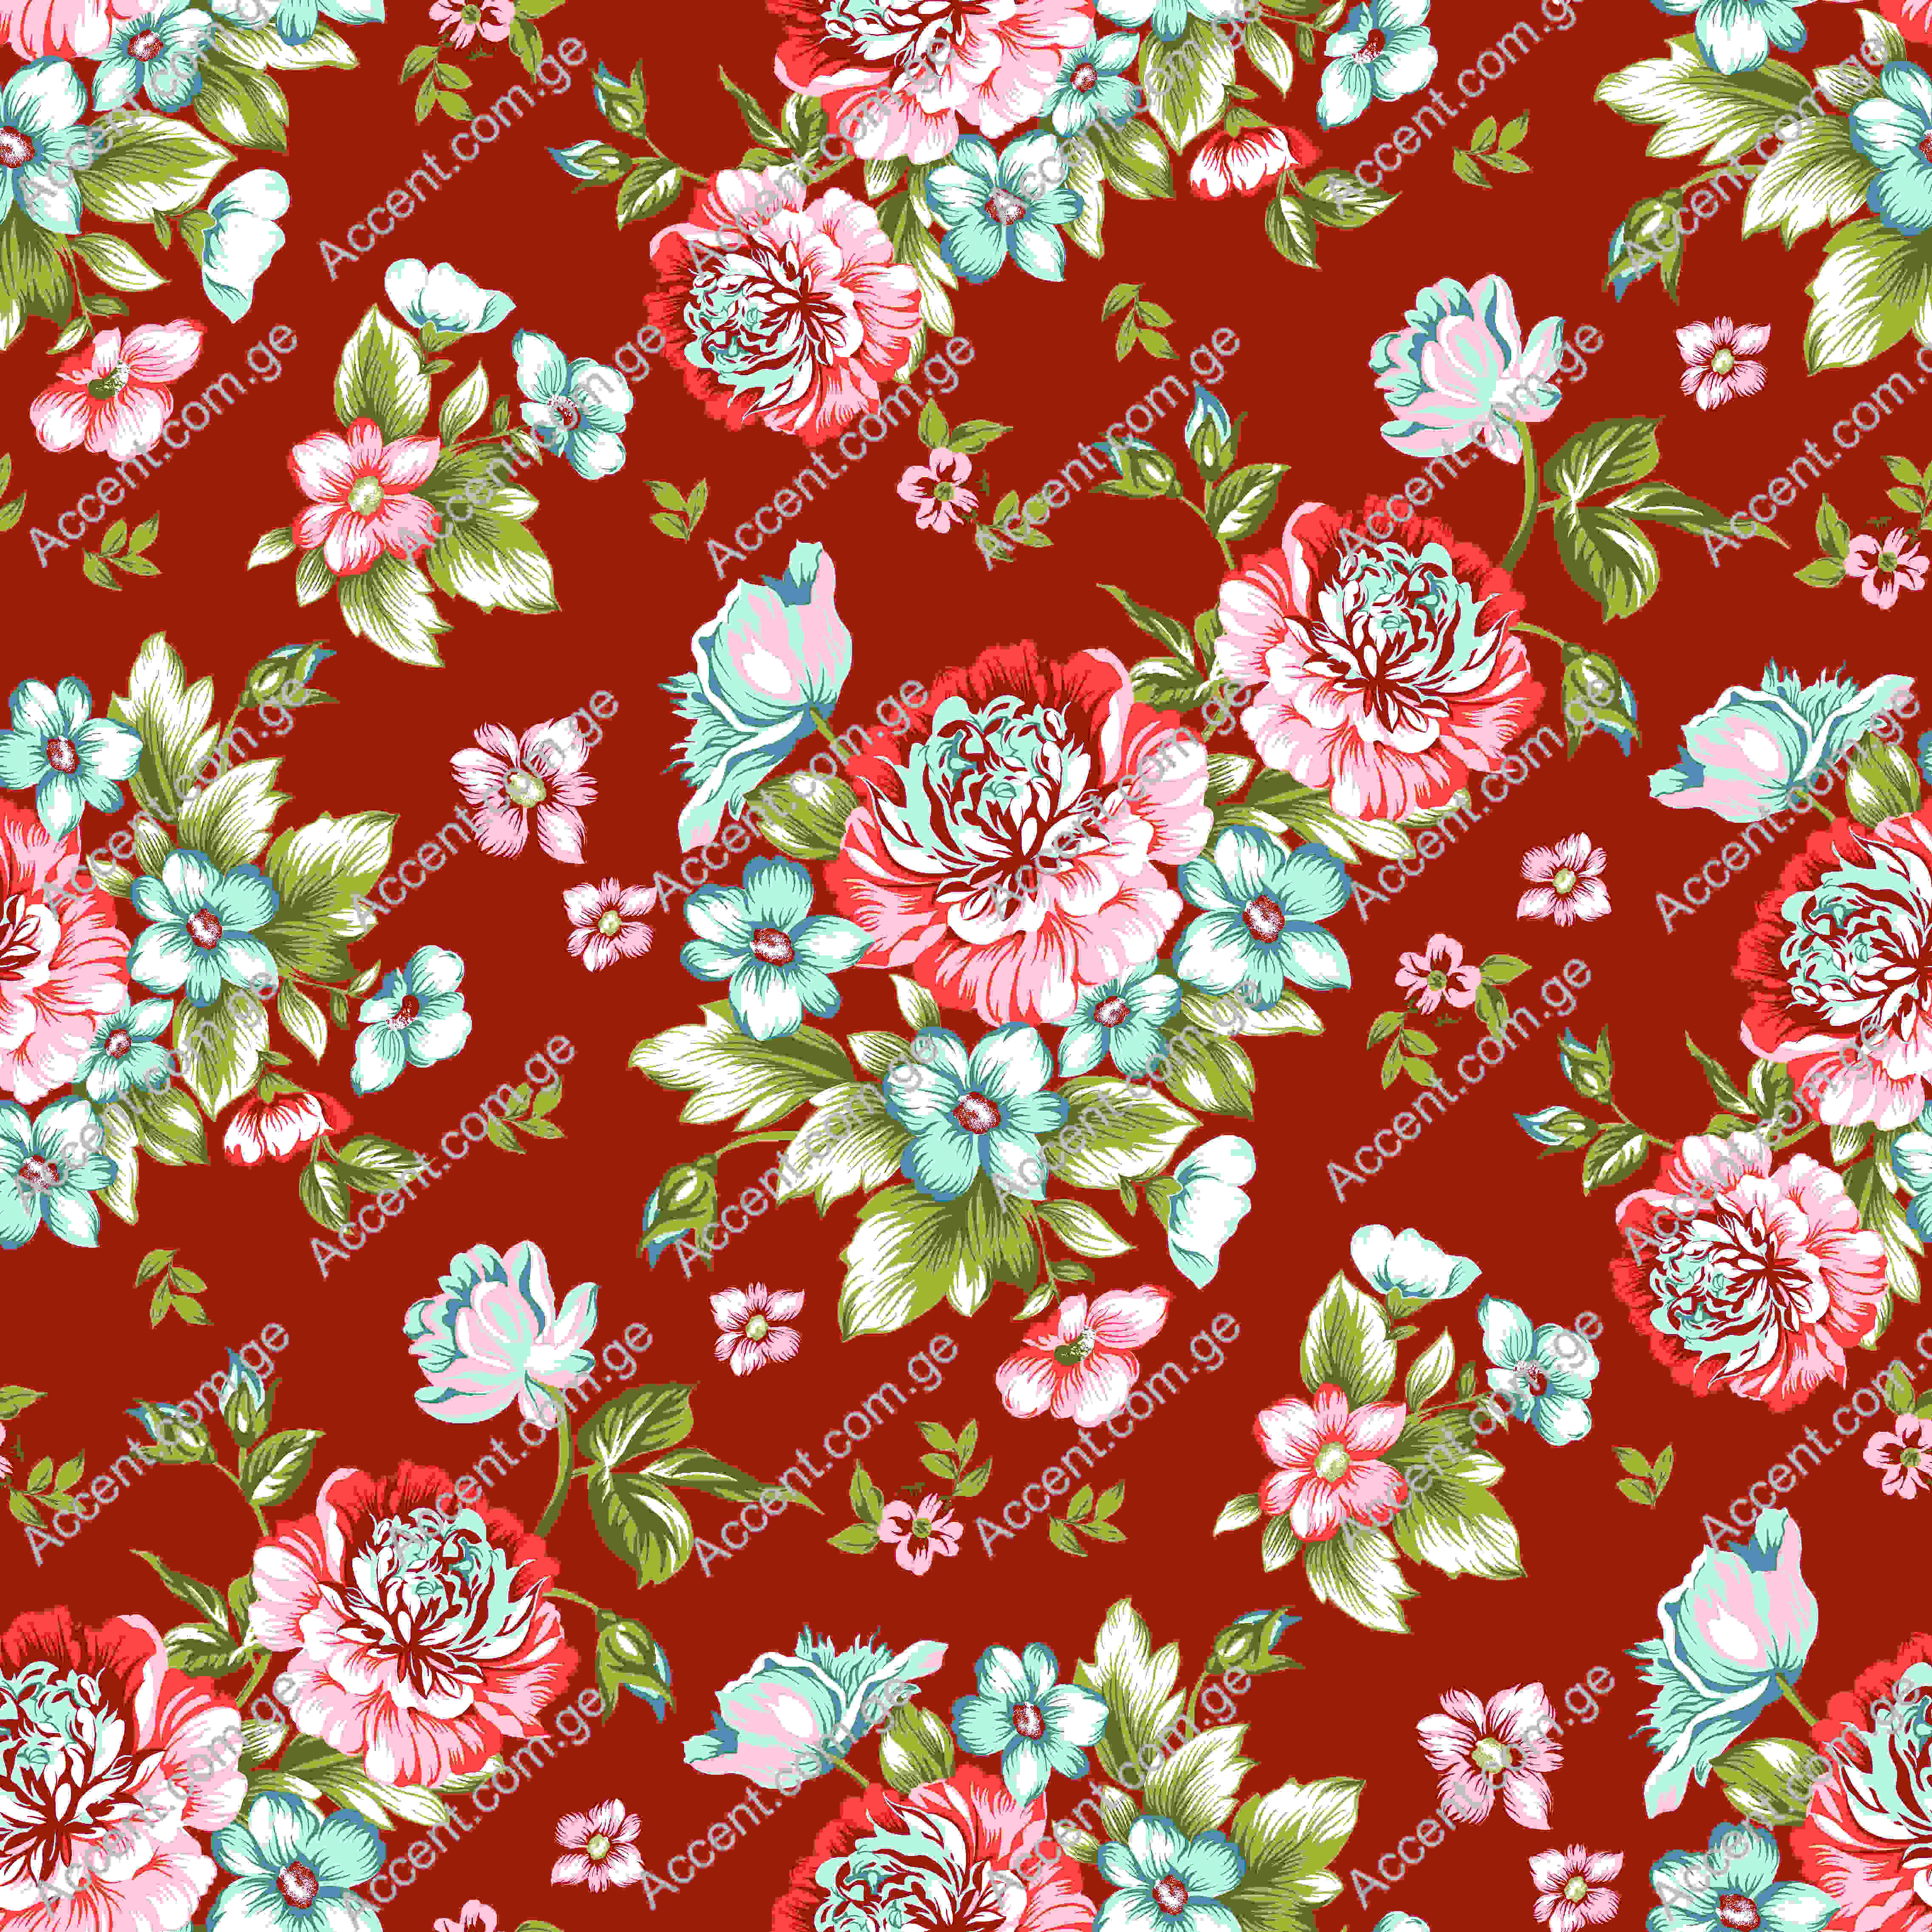 Red background with pink and blue flowers.